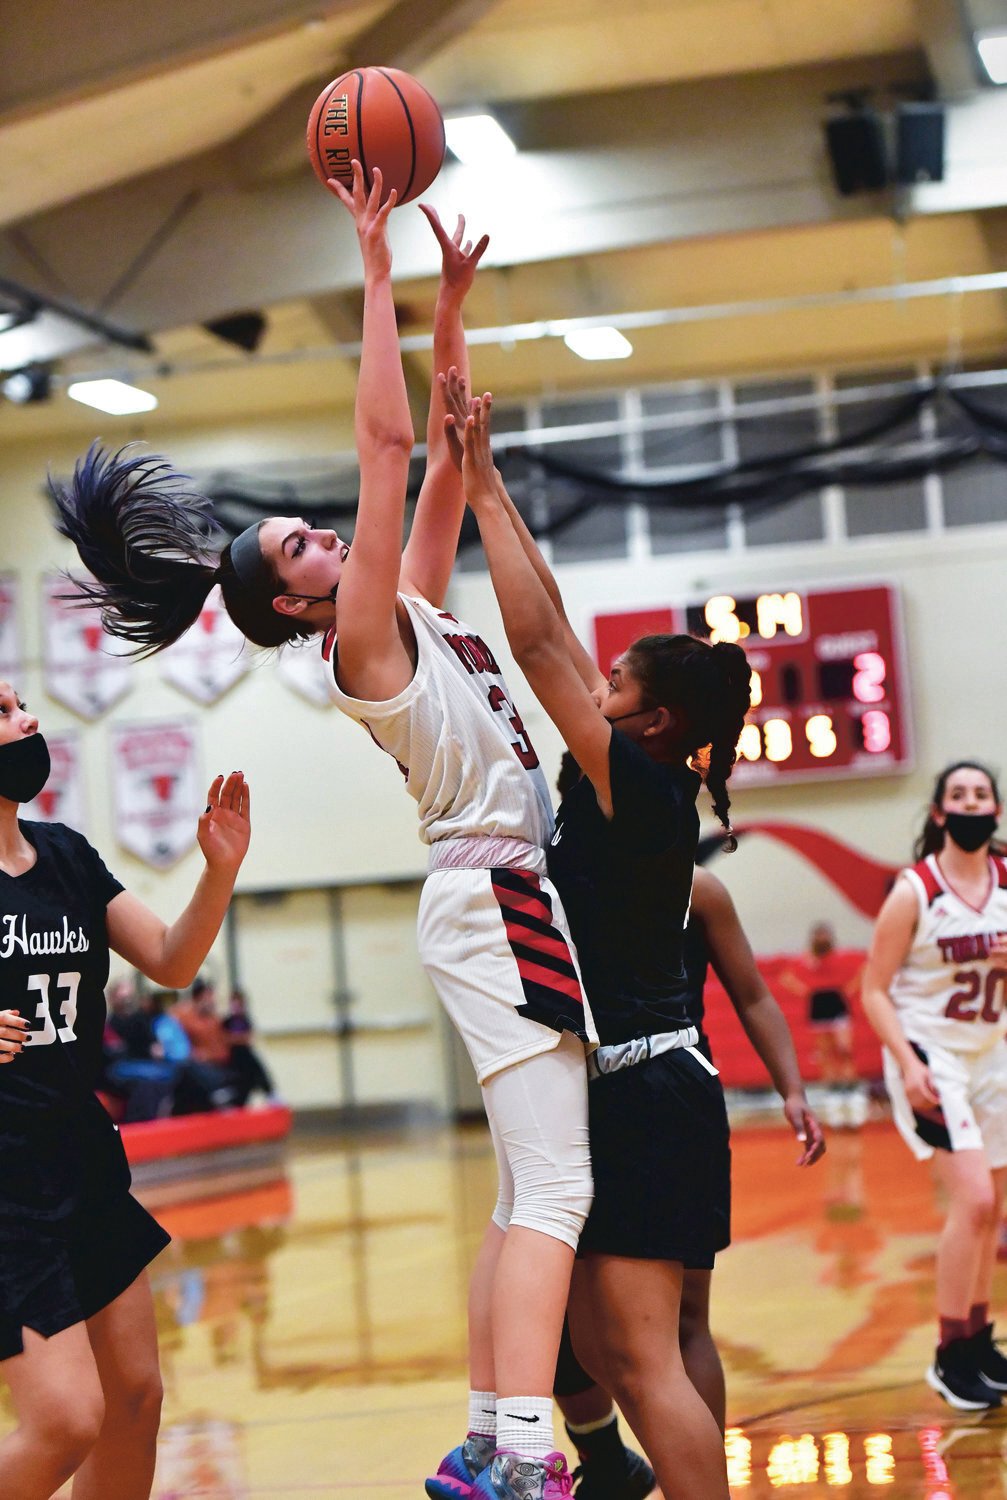 Bayleigh Harder, Yelm High School varsity girls basketball center, left, soars for a shot in the Tornados’ game Thursday, May 27, against River Ridge High School.